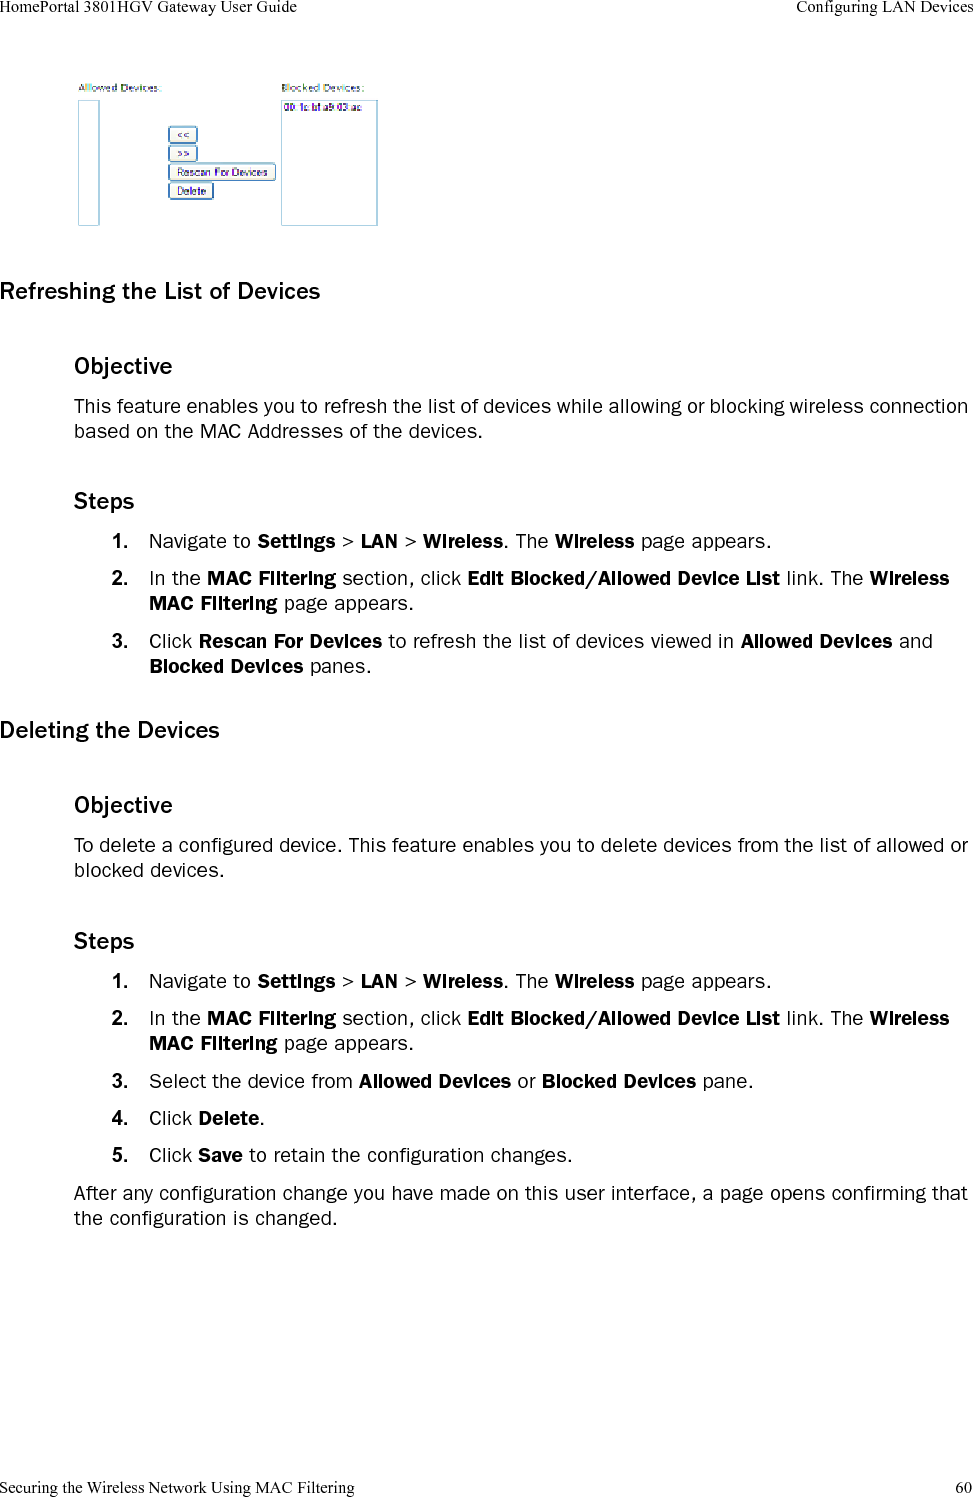 Securing the Wireless Network Using MAC Filtering 60HomePortal 3801HGV Gateway User Guide Configuring LAN DevicesRefreshing the List of DevicesObjectiveThis feature enables you to refresh the list of devices while allowing or blocking wireless connection based on the MAC Addresses of the devices.Steps1. Navigate to Settings &gt; LAN &gt; Wireless. The Wireless page appears.2. In the MAC Filtering section, click Edit Blocked/Allowed Device List link. The Wireless MAC Filtering page appears.3. Click Rescan For Devices to refresh the list of devices viewed in Allowed Devices and Blocked Devices panes.Deleting the DevicesObjectiveTo delete a configured device. This feature enables you to delete devices from the list of allowed or blocked devices.Steps1. Navigate to Settings &gt; LAN &gt; Wireless. The Wireless page appears.2. In the MAC Filtering section, click Edit Blocked/Allowed Device List link. The Wireless MAC Filtering page appears.3. Select the device from Allowed Devices or Blocked Devices pane.4. Click Delete.5. Click Save to retain the configuration changes.After any configuration change you have made on this user interface, a page opens confirming that the configuration is changed.